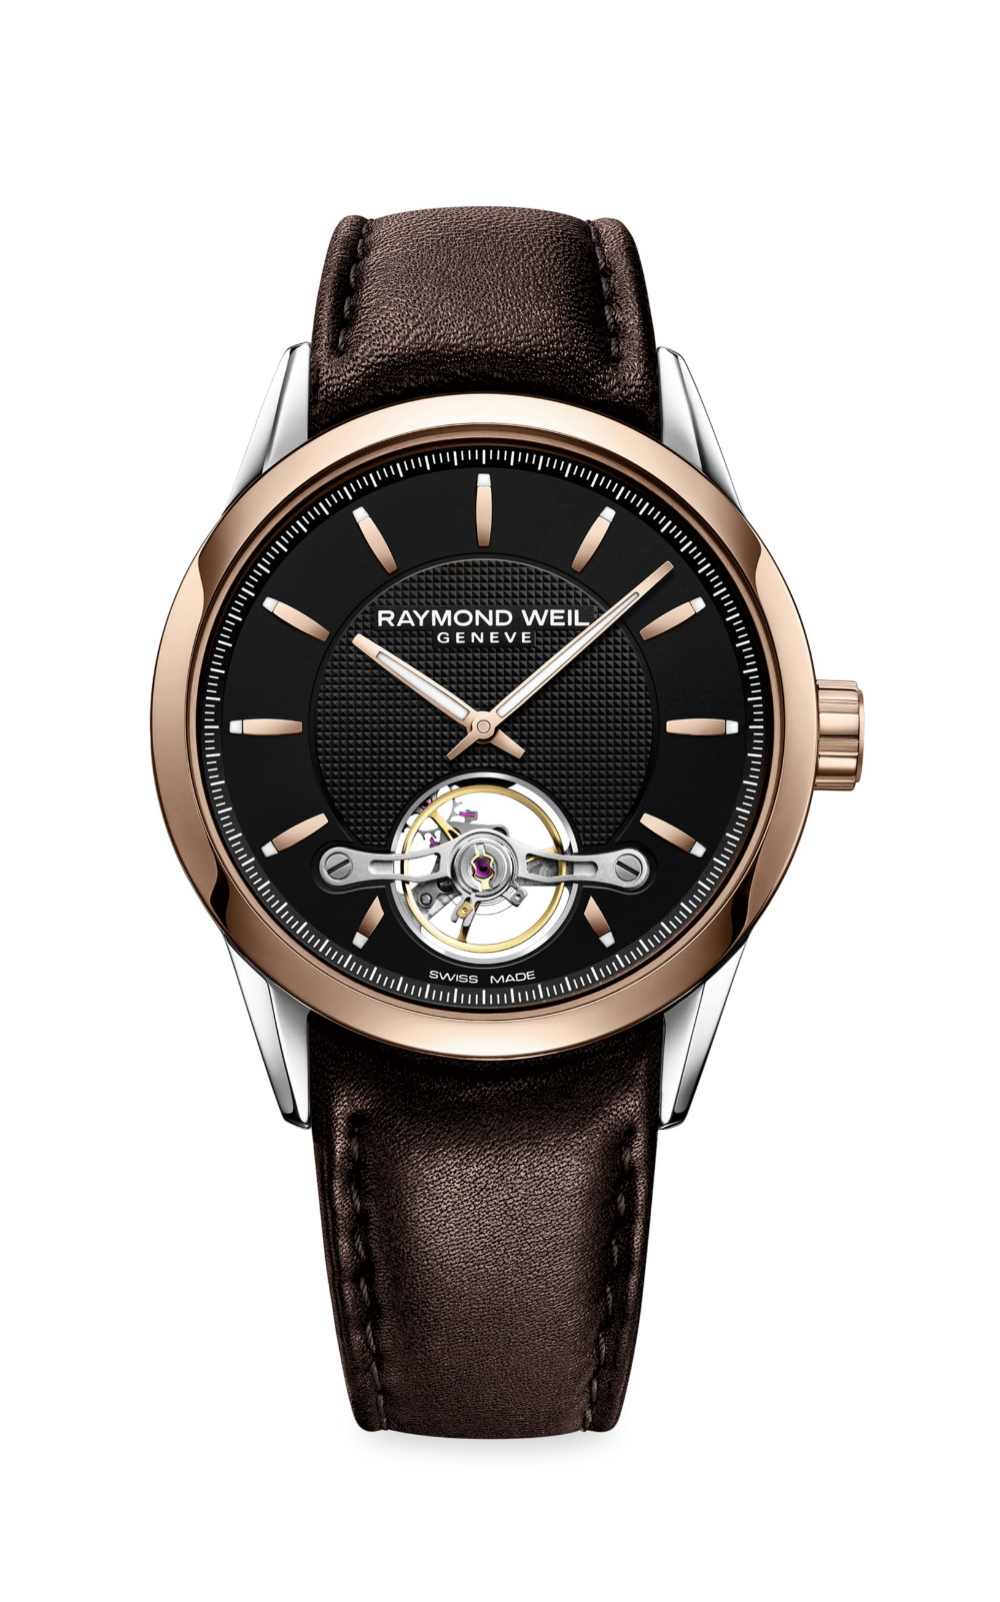 GREAT FOR CHASSAN! Raymond Weil Freelancer Calibre 42MM Two Tone Stainless Steel & Leather Strap Automatic Watch.